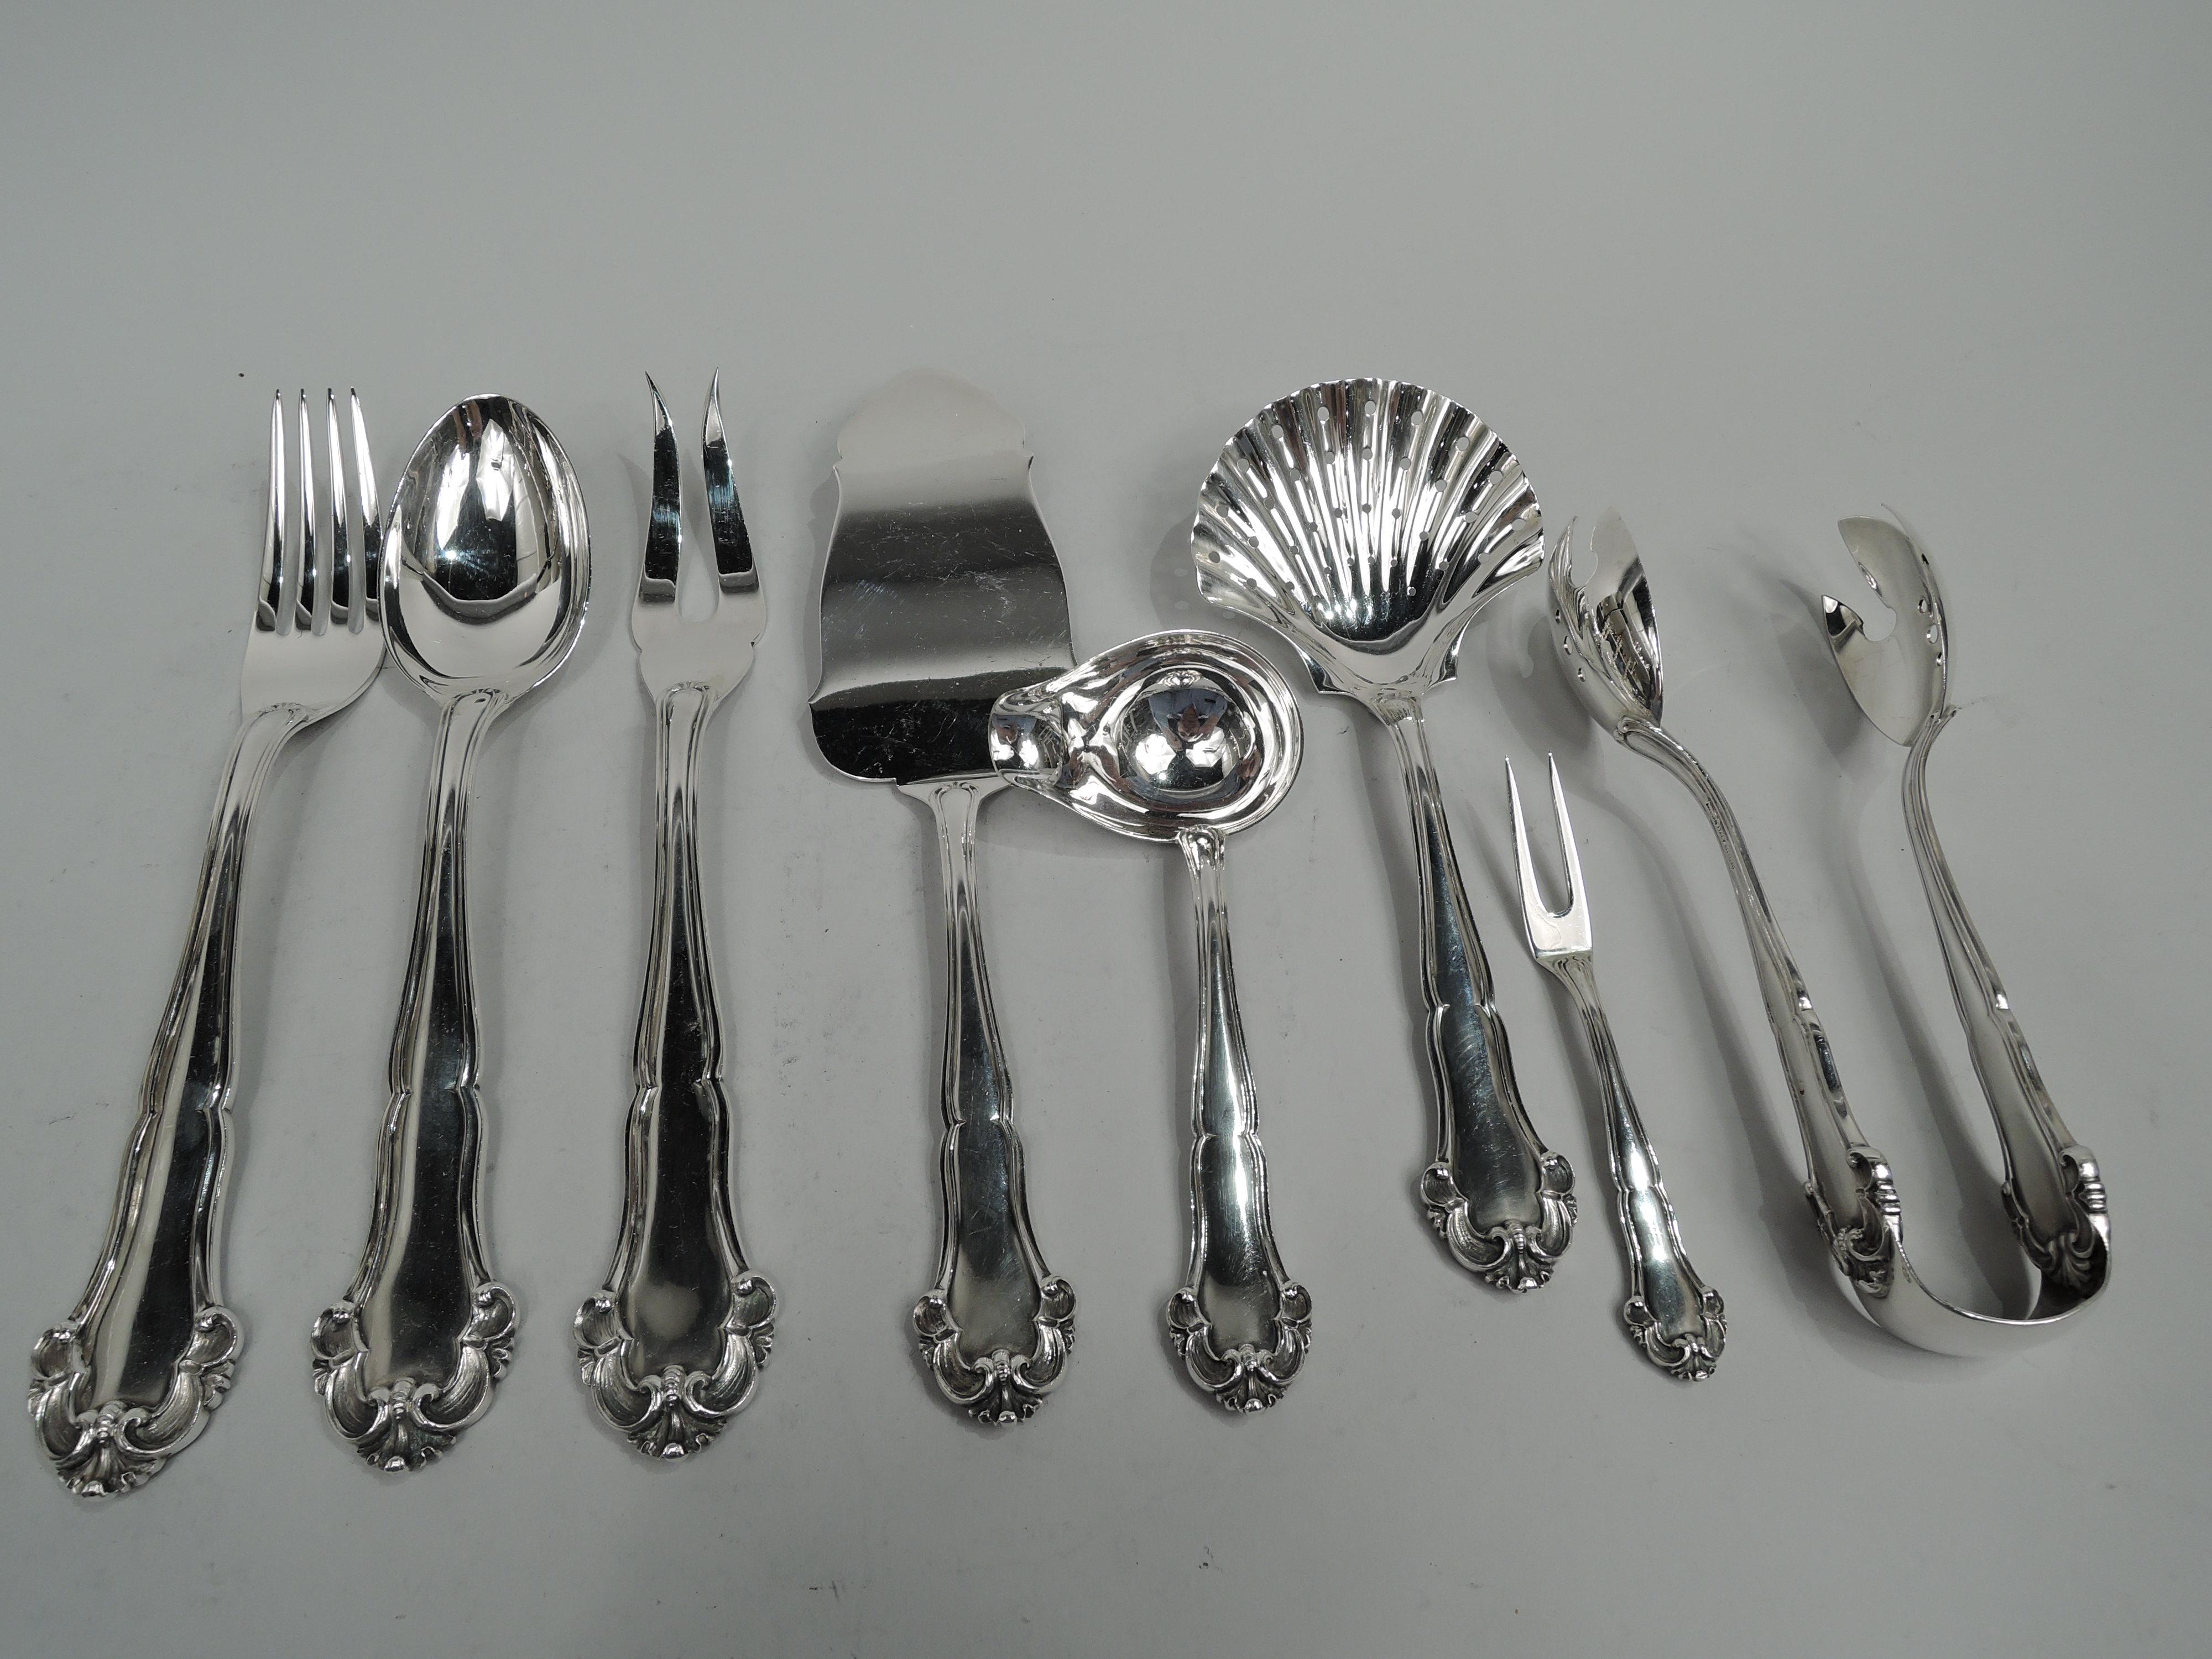 Grande Imperiale sterling silver dinner and lunch set. Made by Buccellati in Italy. This set comprises 216 pieces:

Forks: 16 dinner forks (8 3/4) 16 luncheon forks (7 5/8), 16 salad forks (7), 16 pastry forks (6 7/8), and 16 seafood cocktail